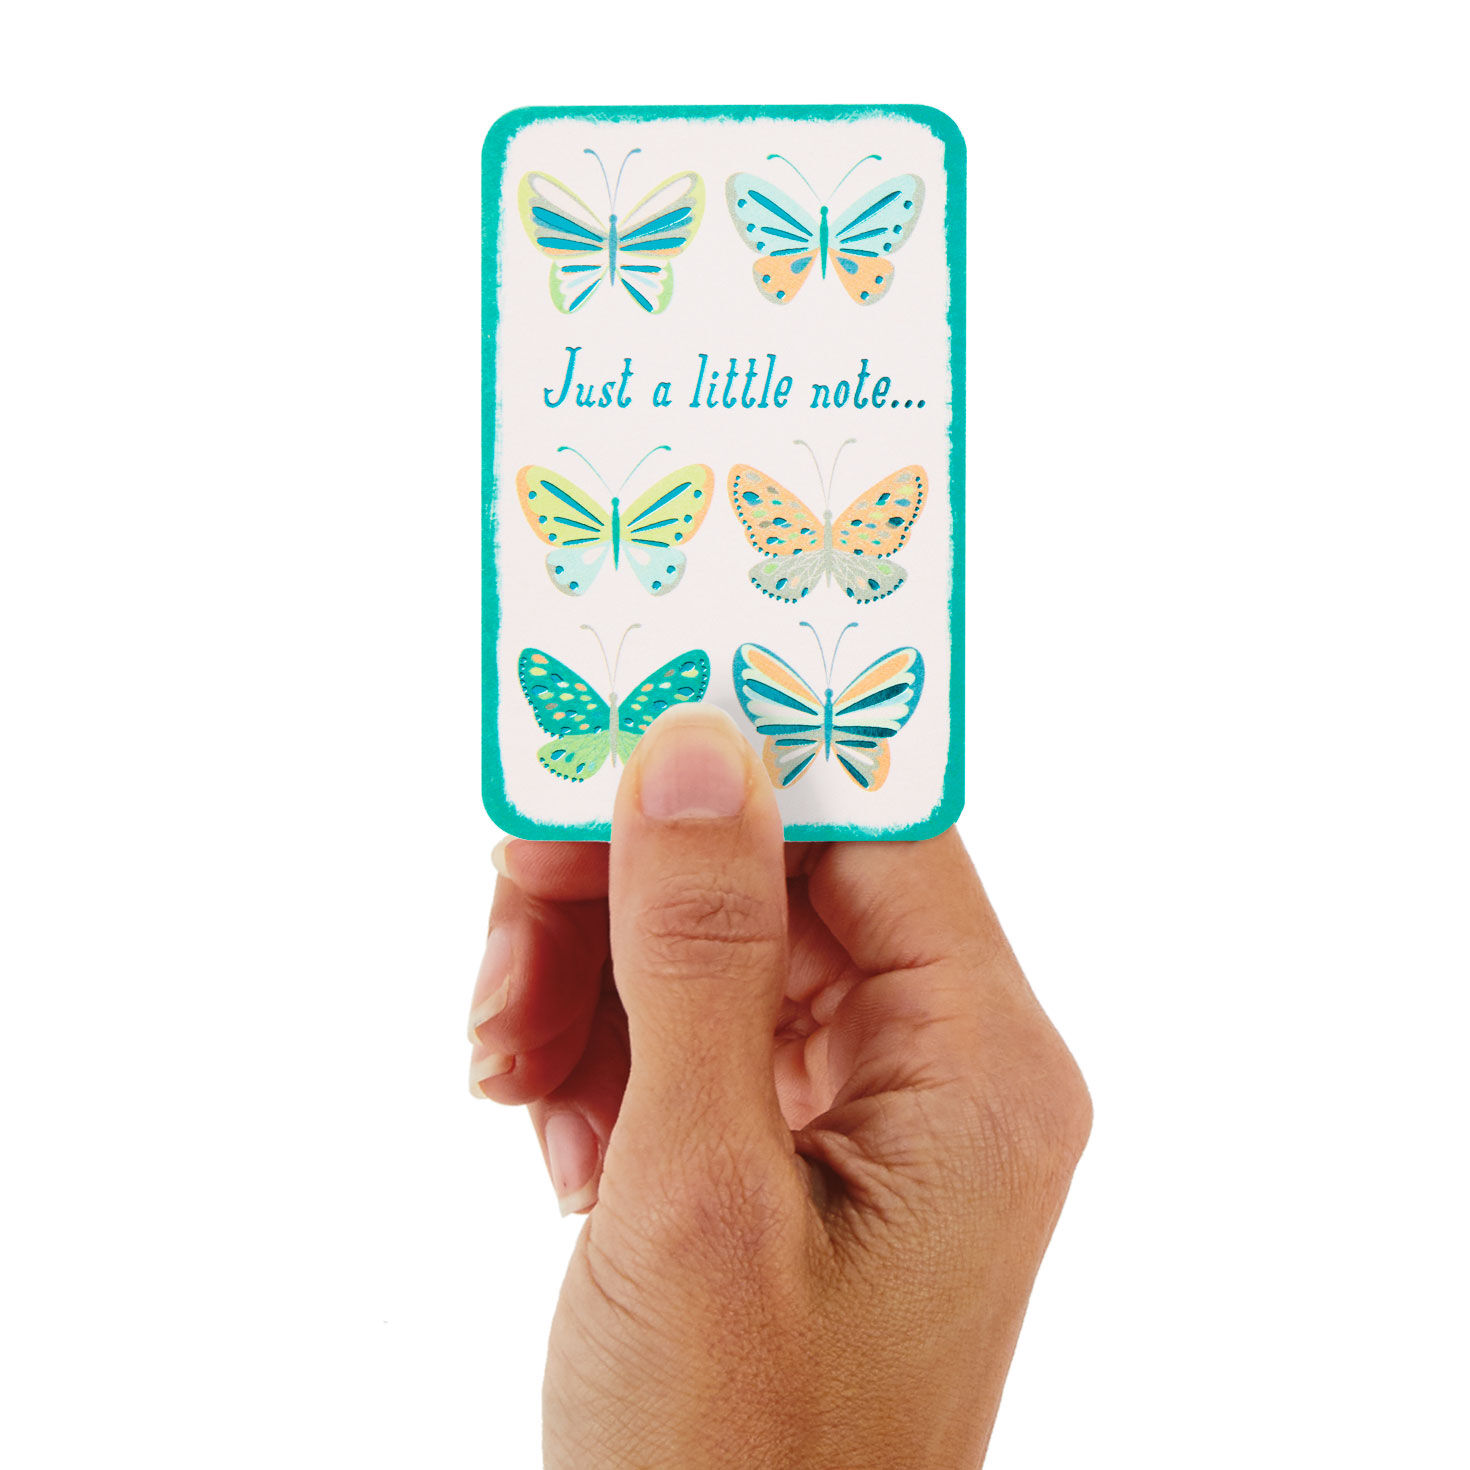 3.25" Mini Note to Lift Your Spirits Thinking of You Card for only USD 1.99 | Hallmark